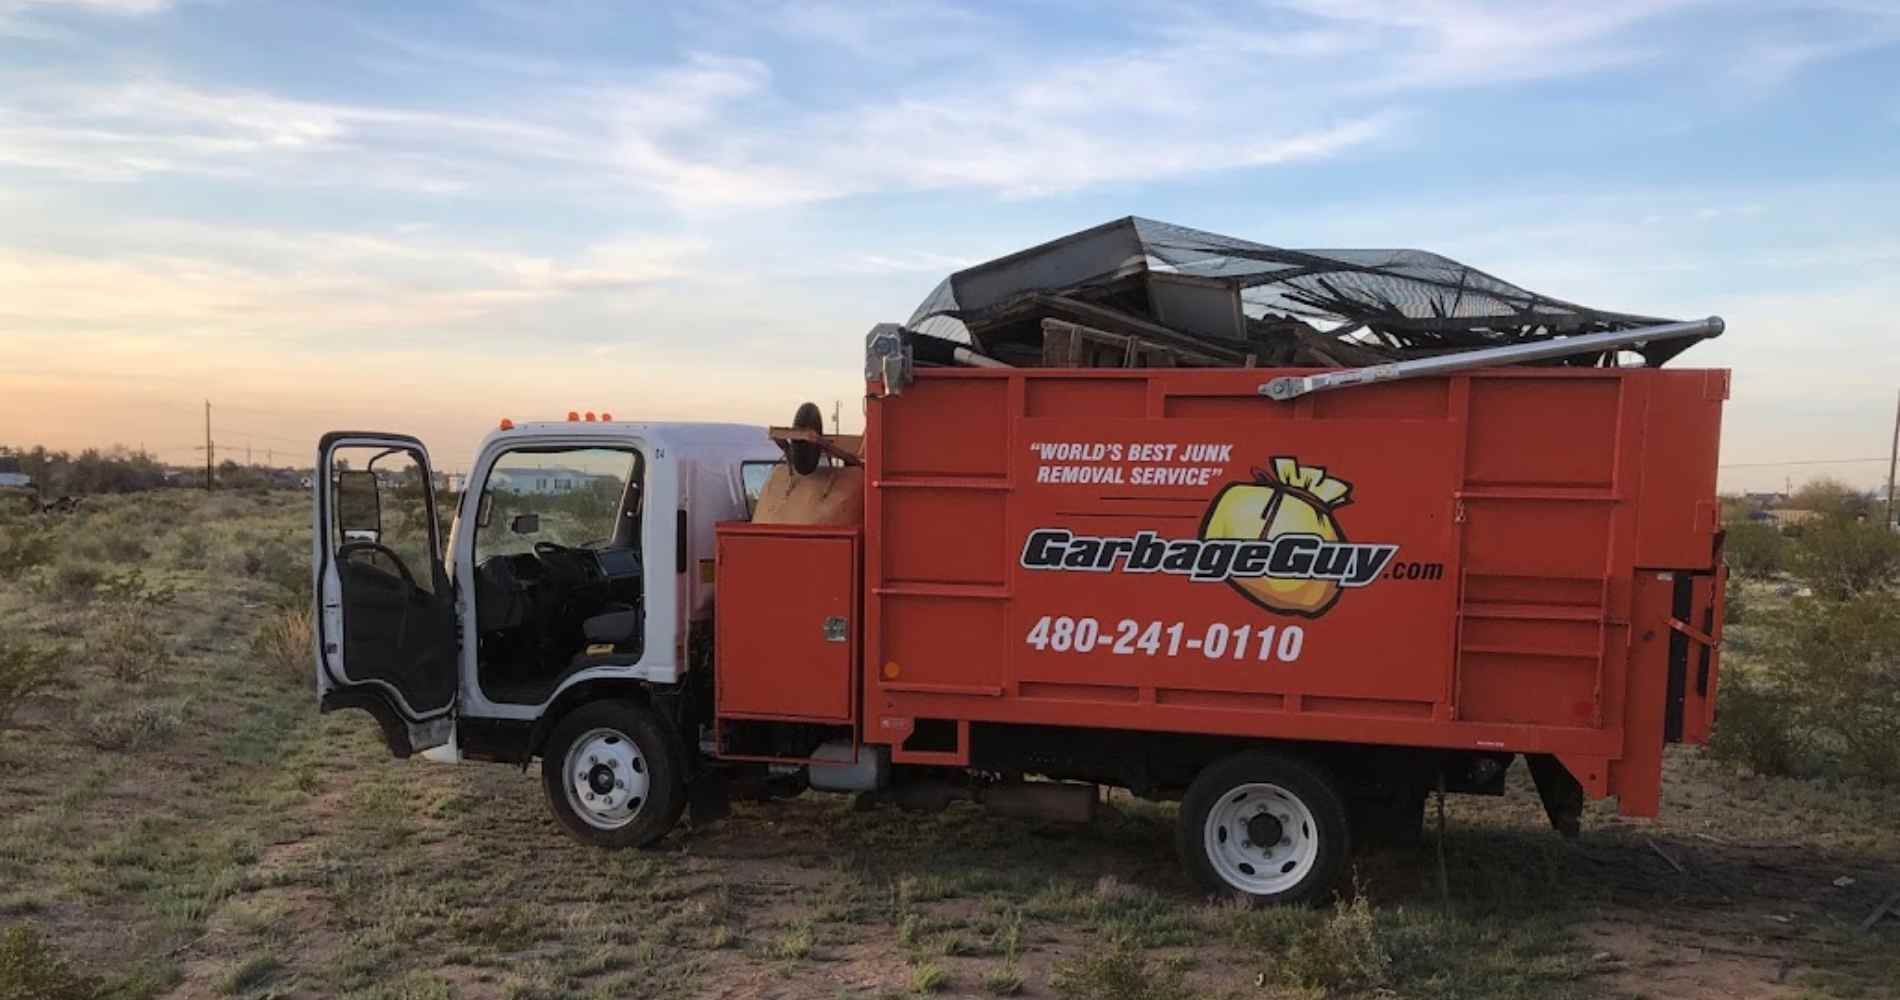 #1 for Junk Removal in Florence, AZ with Over 1200 5-Star Reviews!